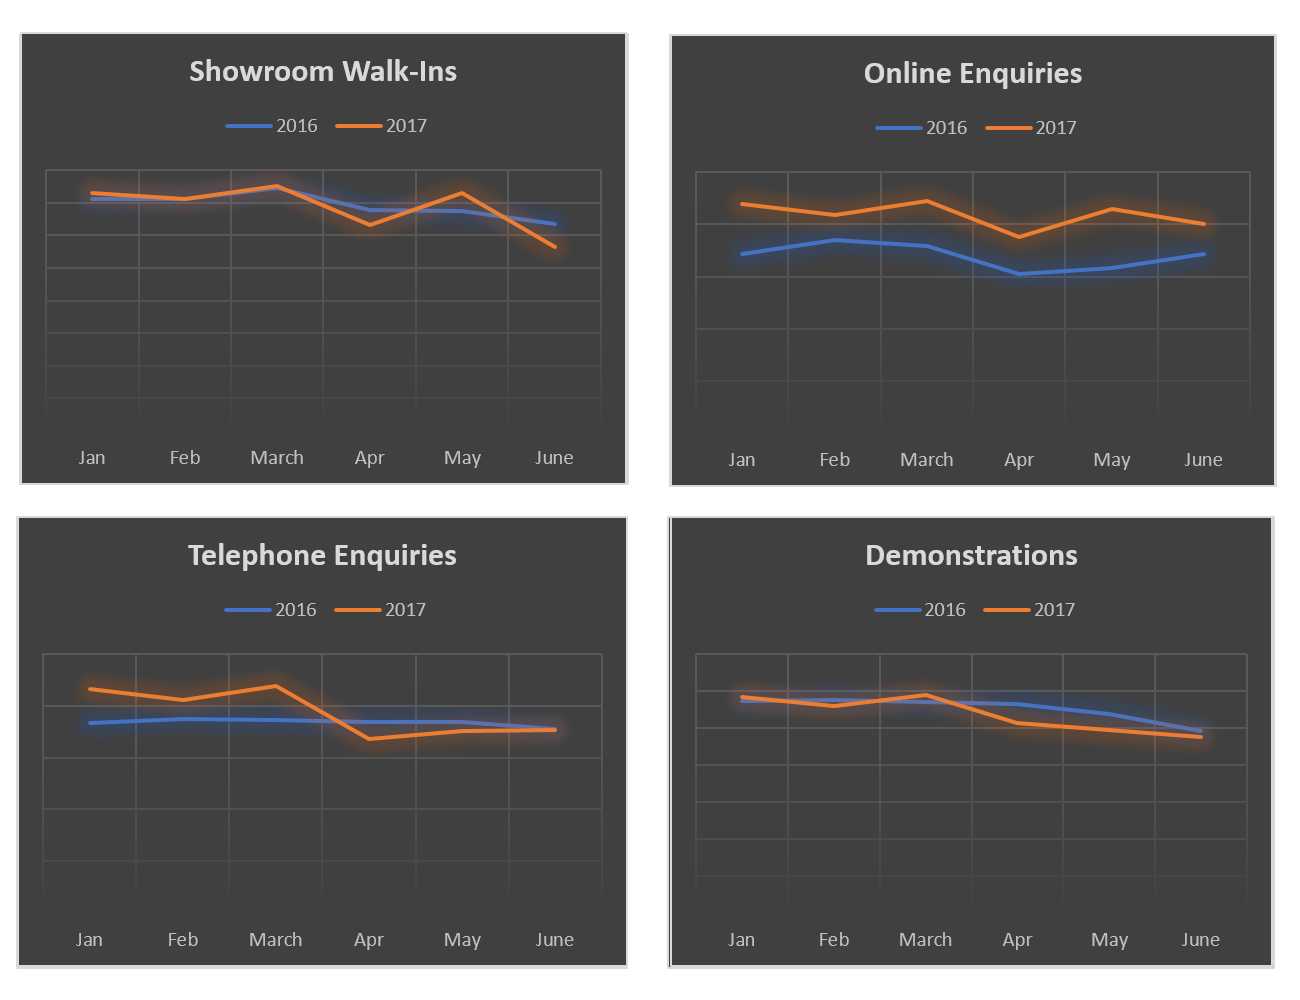 A year on year comparison of showroom walk-ins, demonstrations, online and telephone enquiries